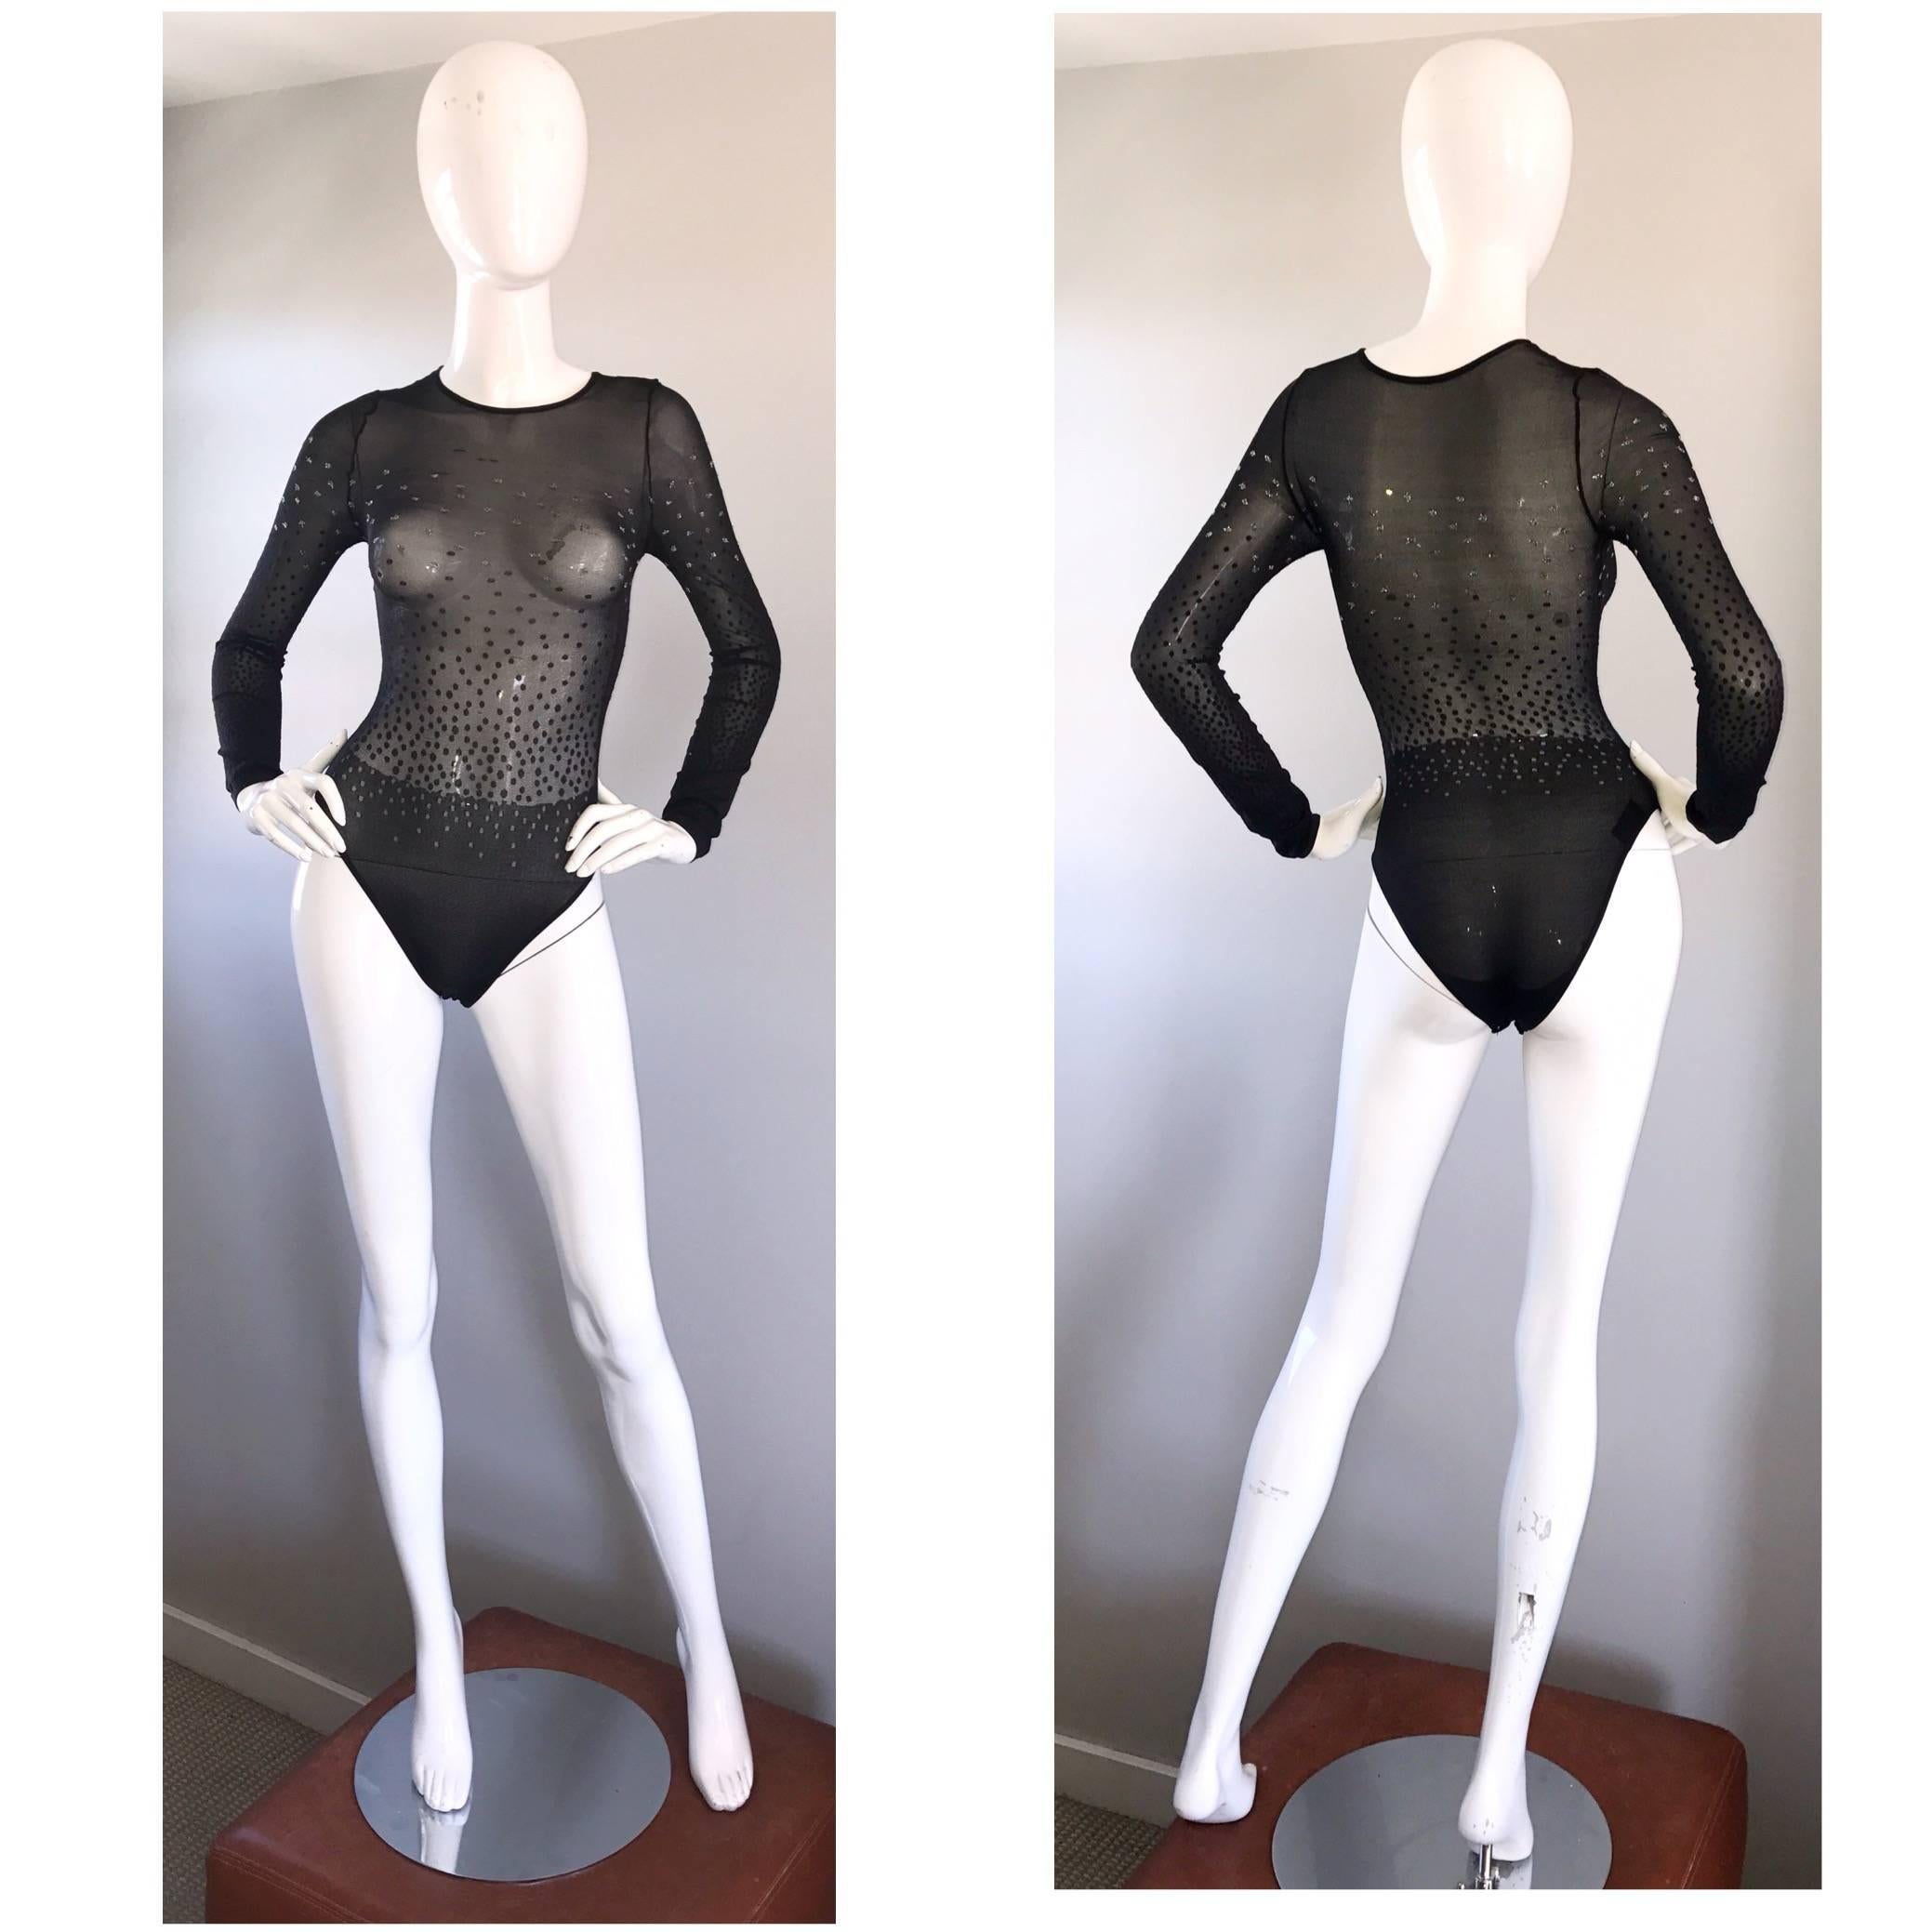 Lot of three brand new WOLFORD and COSABELLA bodysuits! From left to right is an Italian Cosabella black crochet high neck thong bodysuit. A red semi sheer sleeveless bodysuit. A black and silver metallic long sleeve semi sheer bodysuit. Can easily